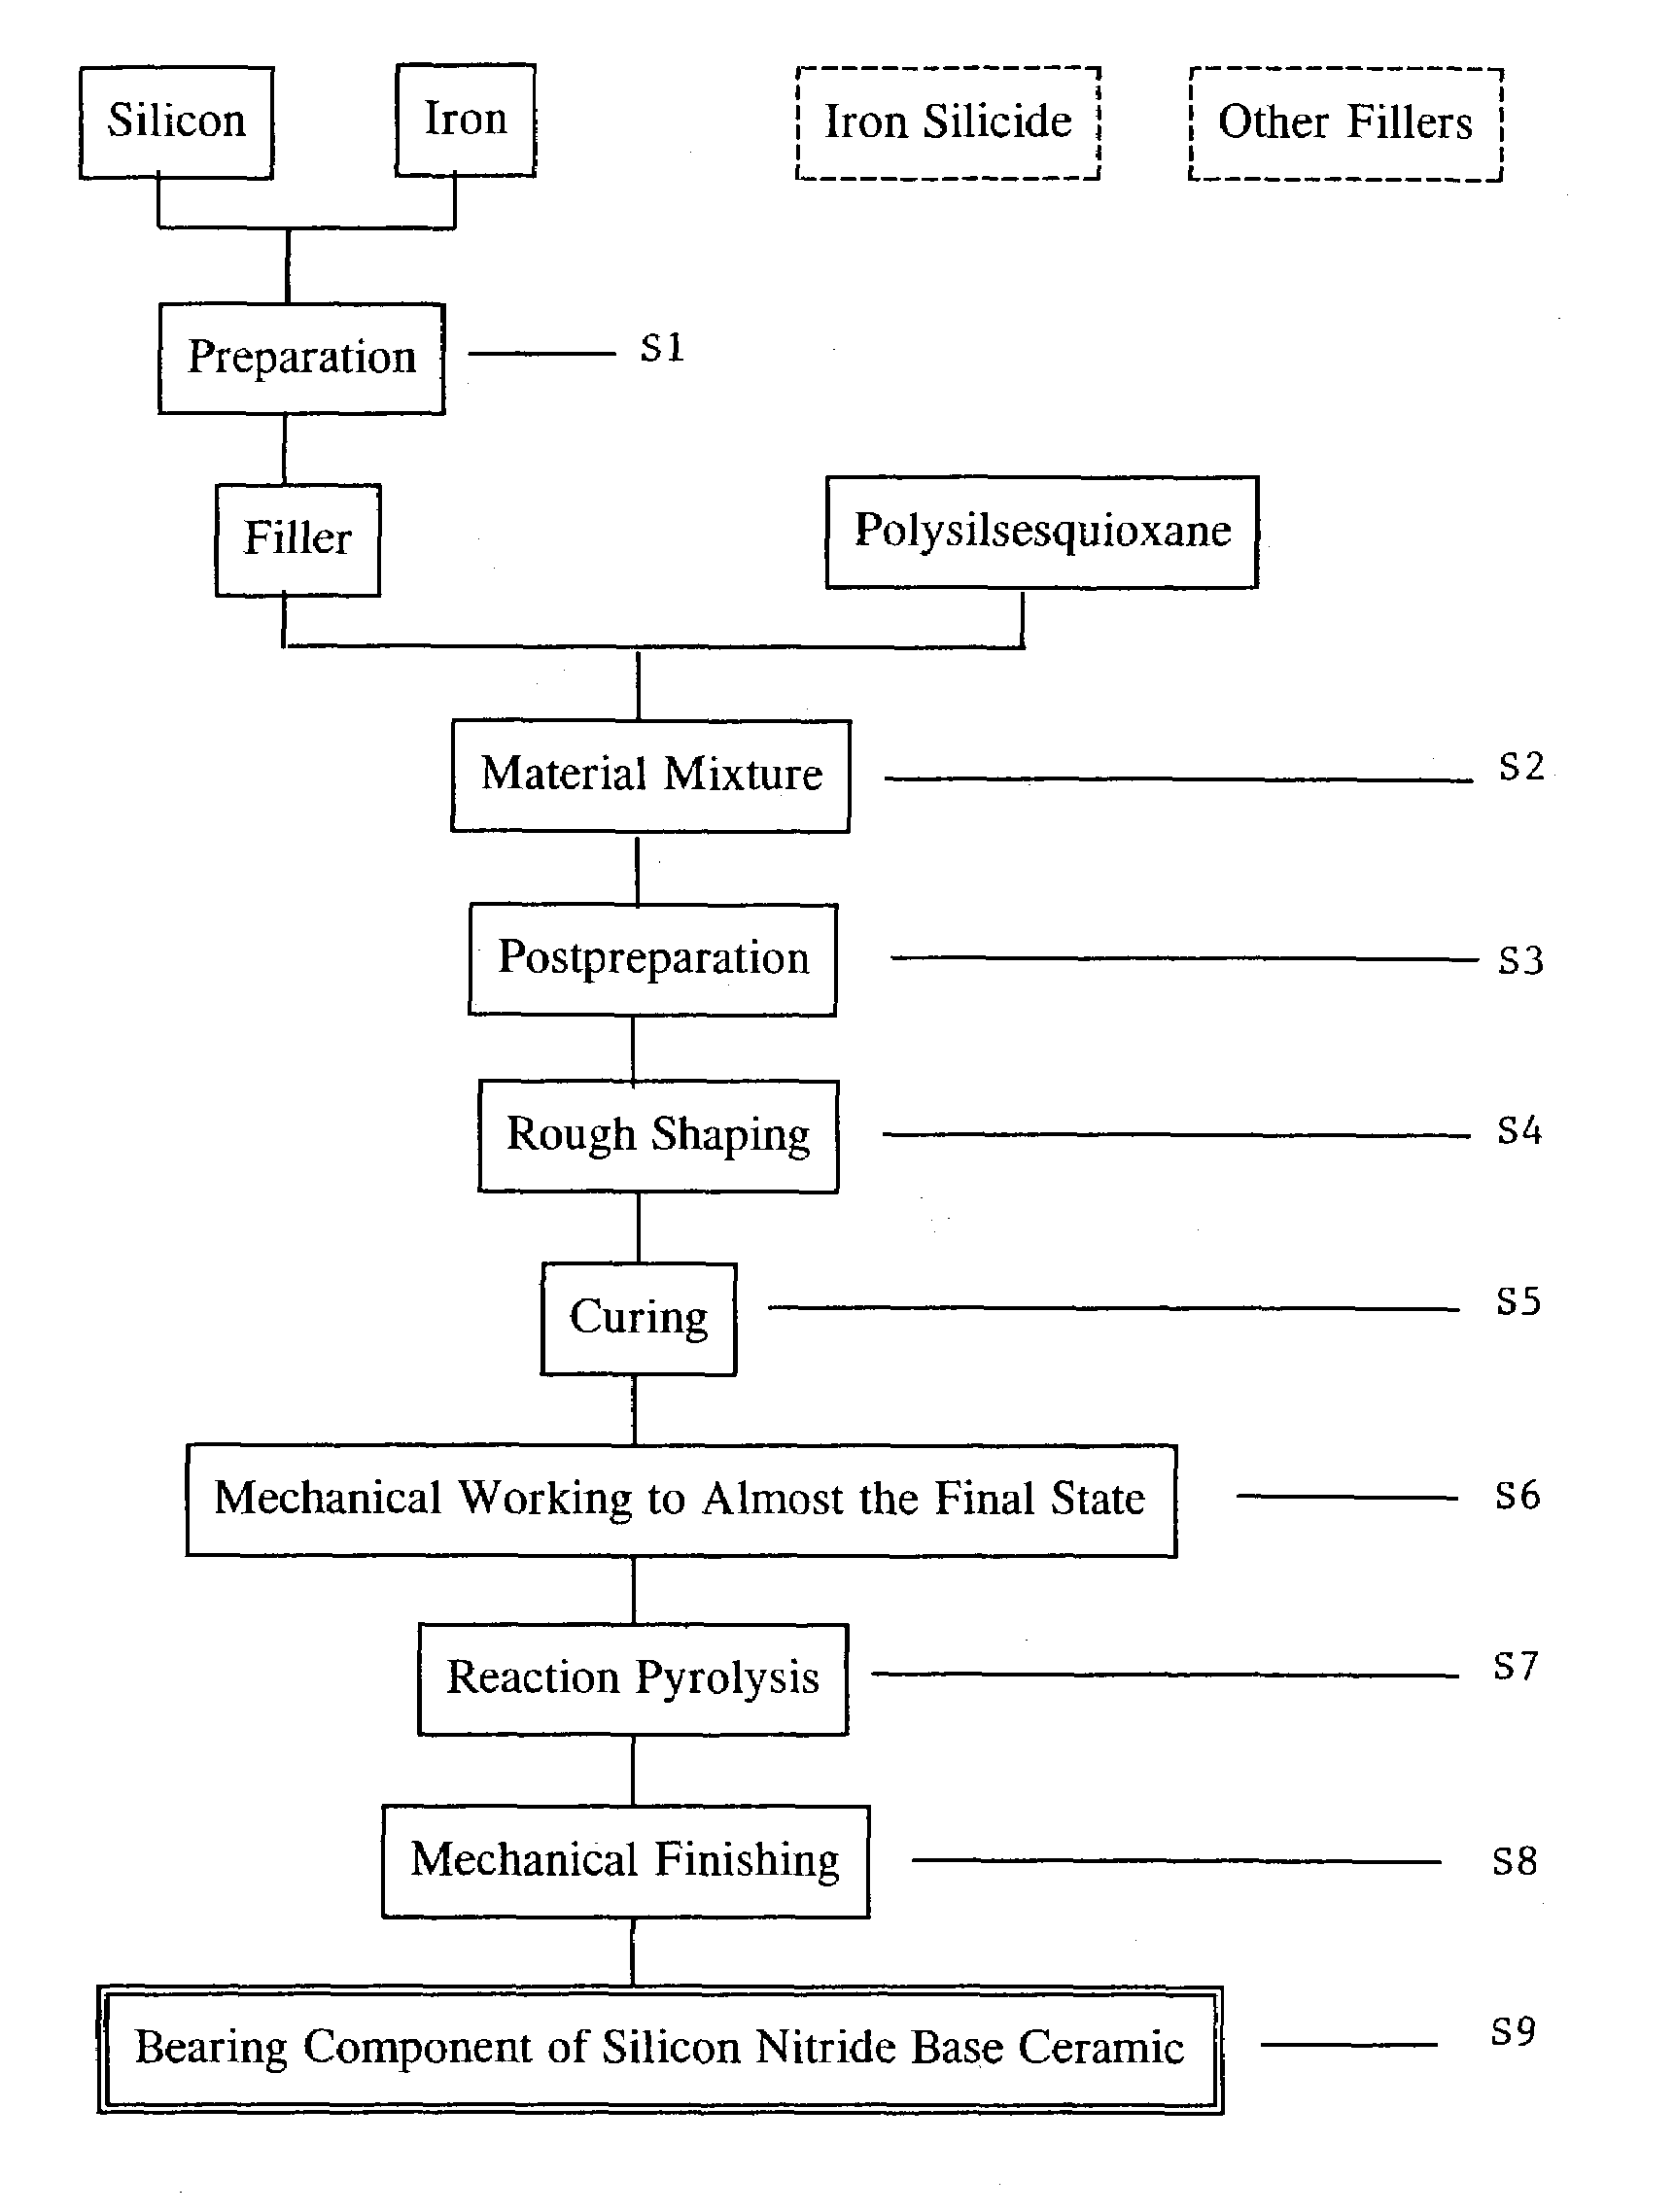 Process for producing ceramic bearing components